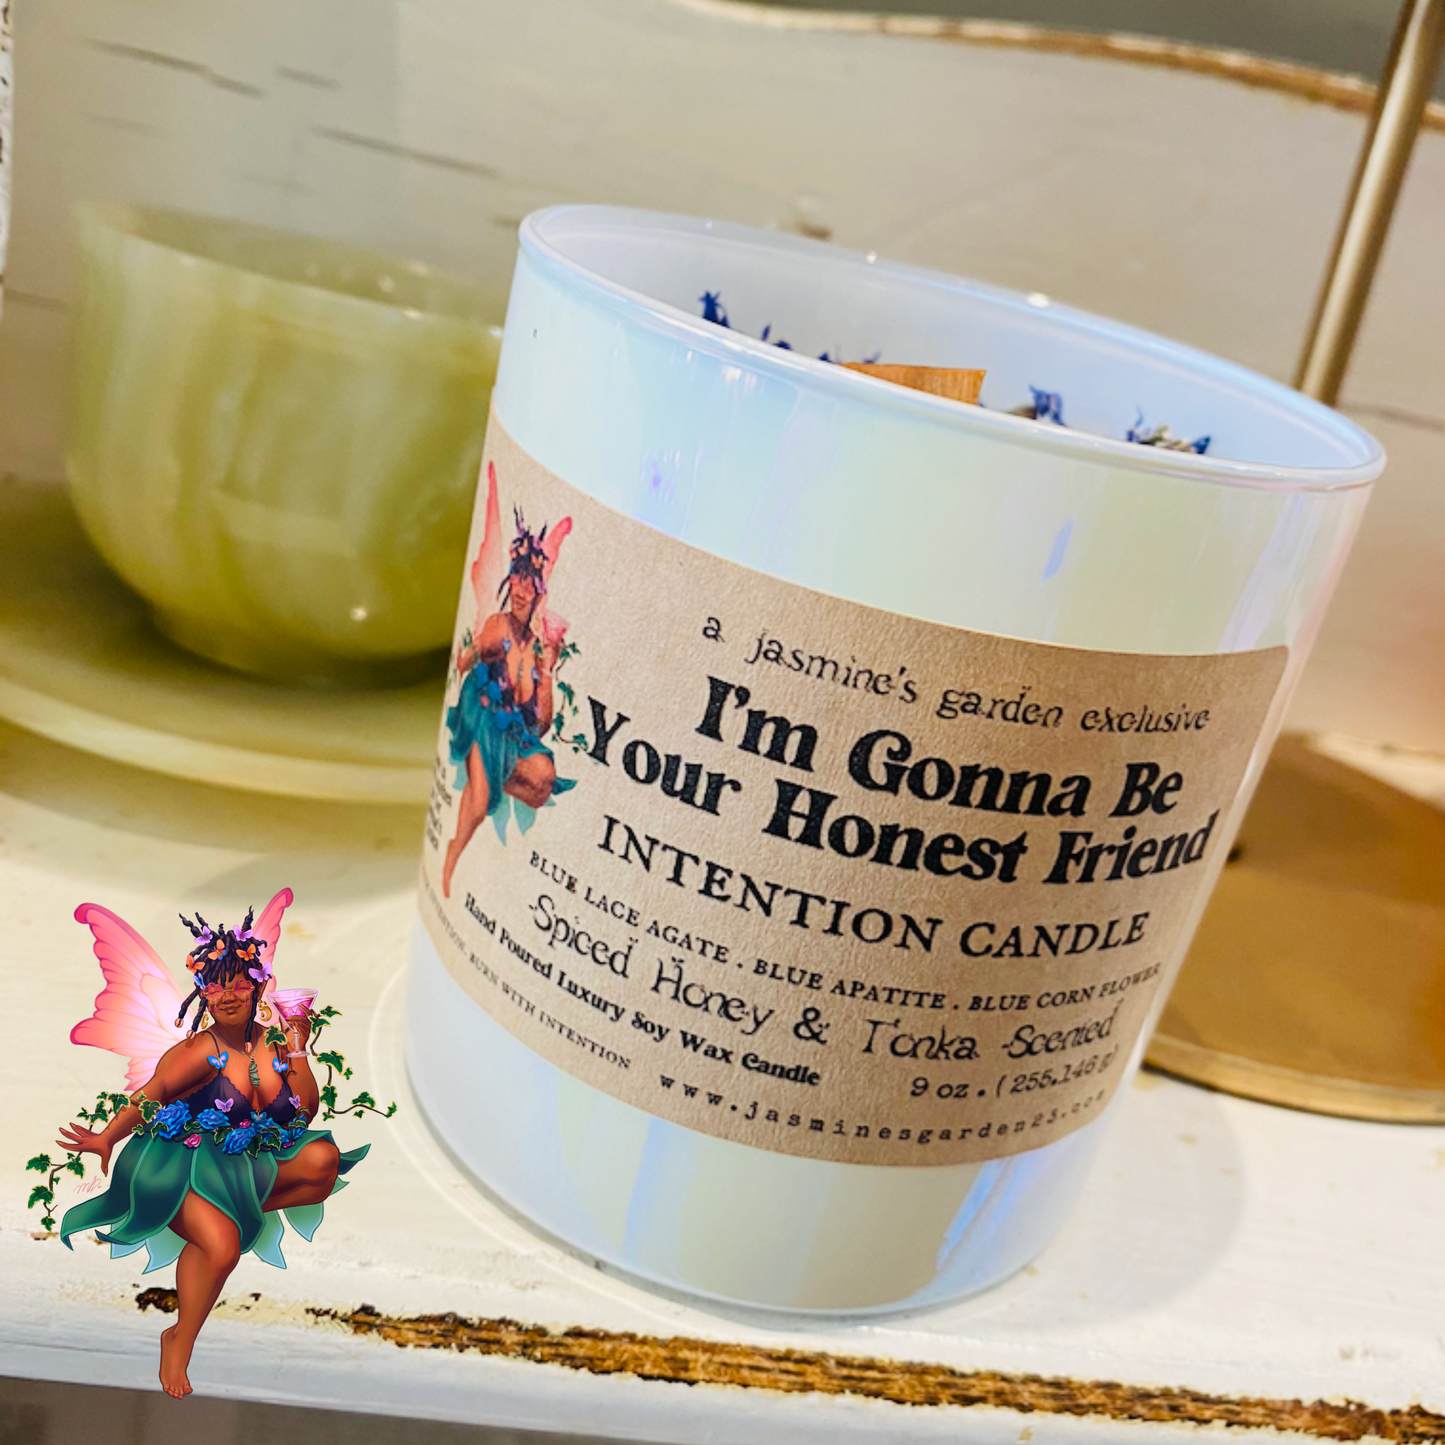 I'm Gonna Be Your Honest Friend Organic Coconut Soy Wax Intention Candle - 9 oz